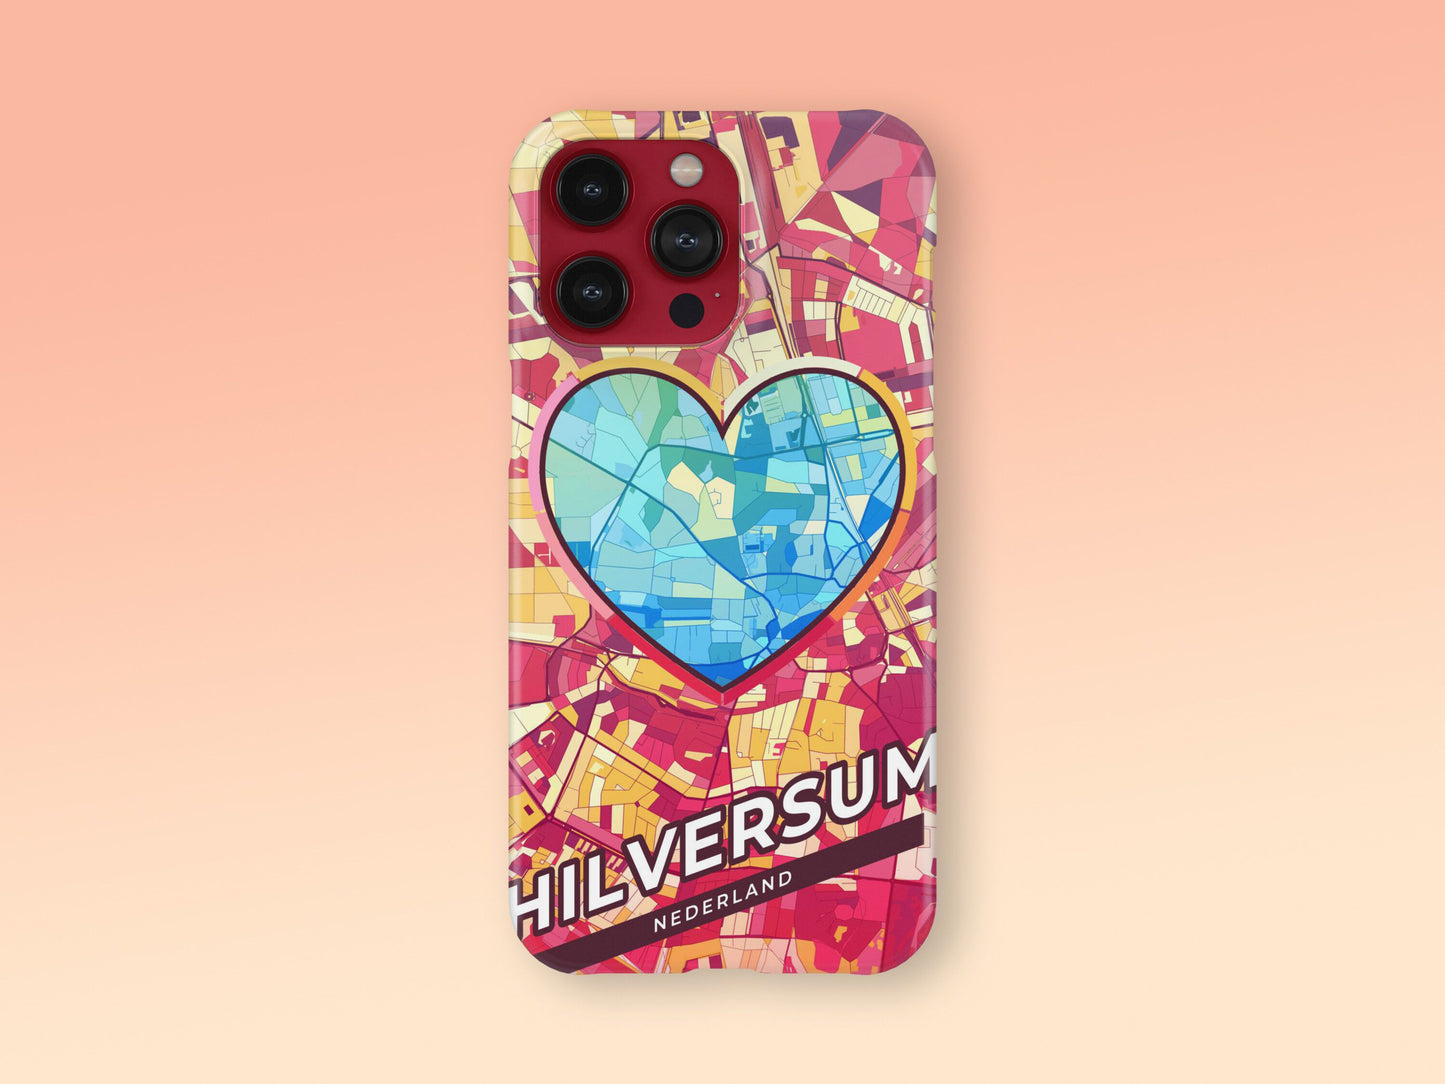 Hilversum Netherlands slim phone case with colorful icon. Birthday, wedding or housewarming gift. Couple match cases. 2